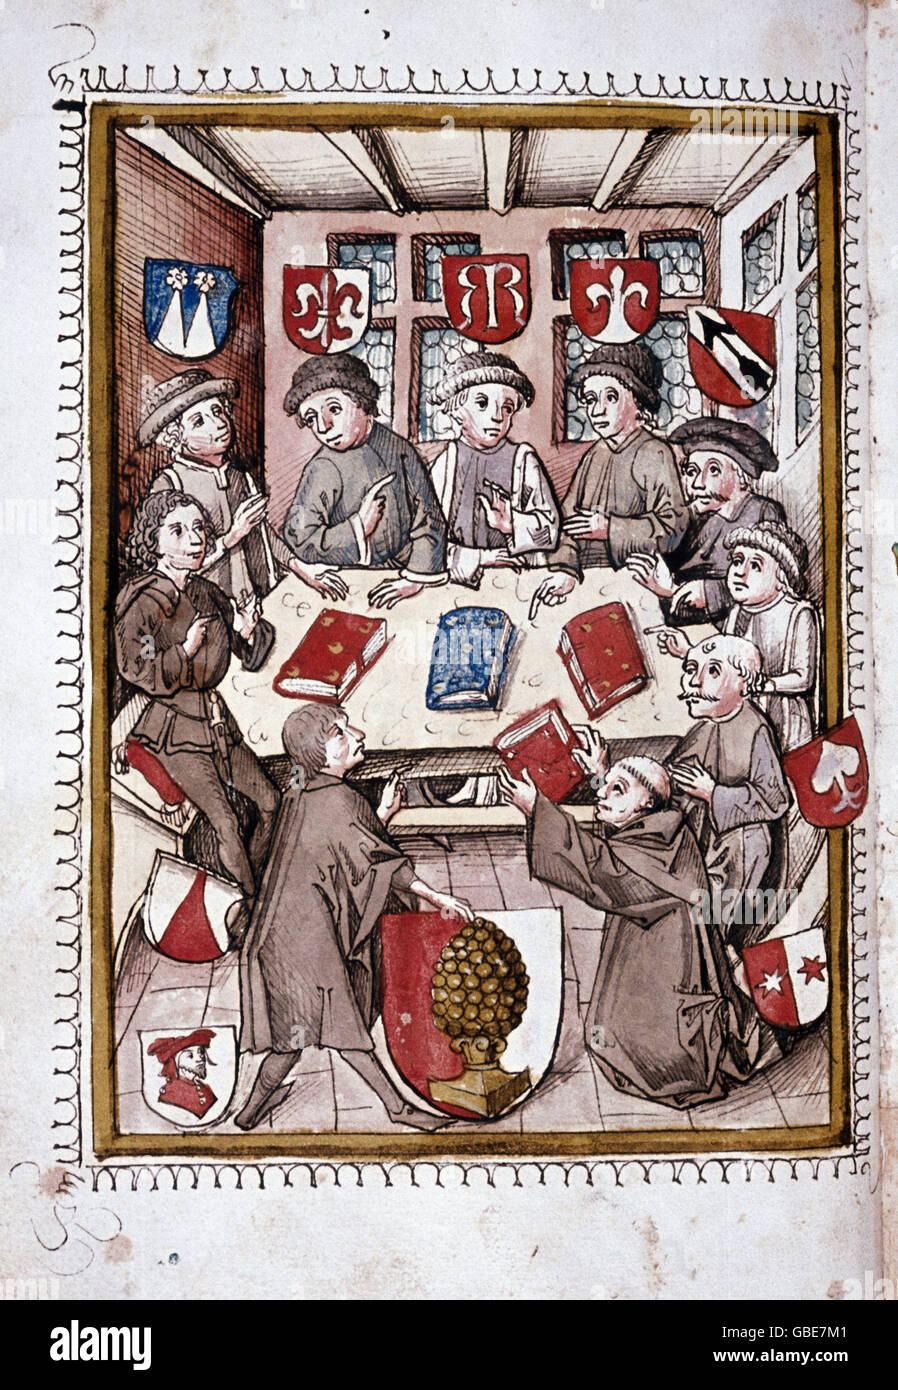 geography / travel,Germany,Augsburg,monk Sigmund Meisterlin,(St. Ulrich and Afra)delivering his history of the town of 1456 to the city council,miniature,15th century,Middle Ages,medieval,mediaeval,Sigmund Meisterlin(* circa 1435),book,books,chronicle,chronicles,history of a town,town council,city council,CC,town councils,city councils,coat of arms,city arms,monk,monks,delivering,deliver,miniature,miniatures,Central Europe,Europe,historic,historical,book-painting,book painting,illuminated manuscript,people,people,Additional-Rights-Clearences-Not Available Stock Photo